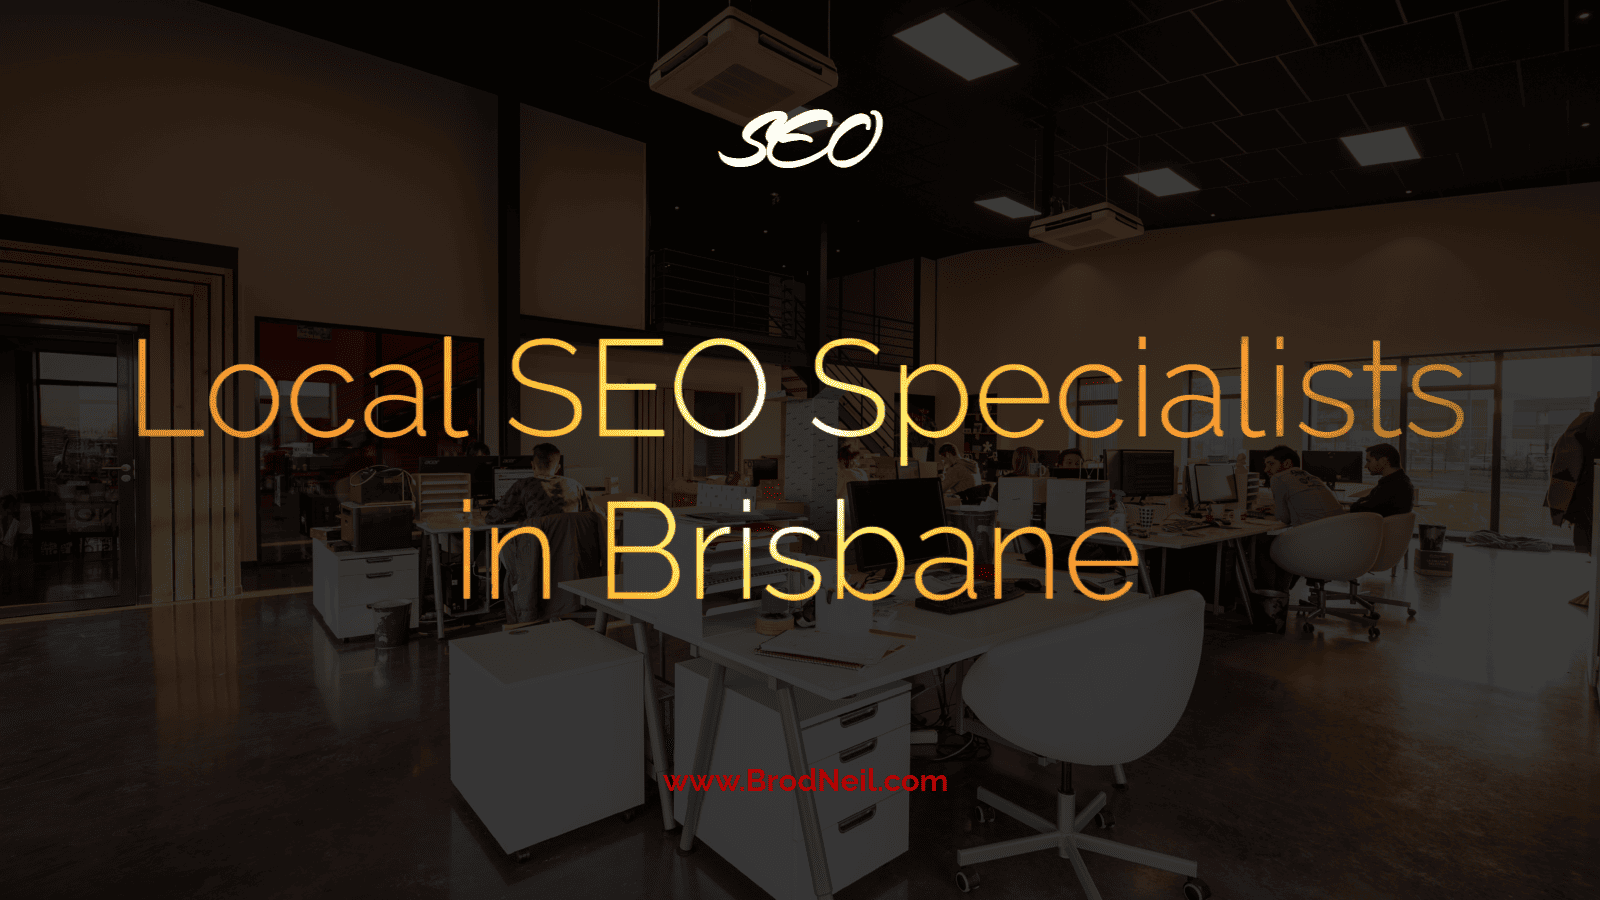 Local SEO Specialists in Brisbane